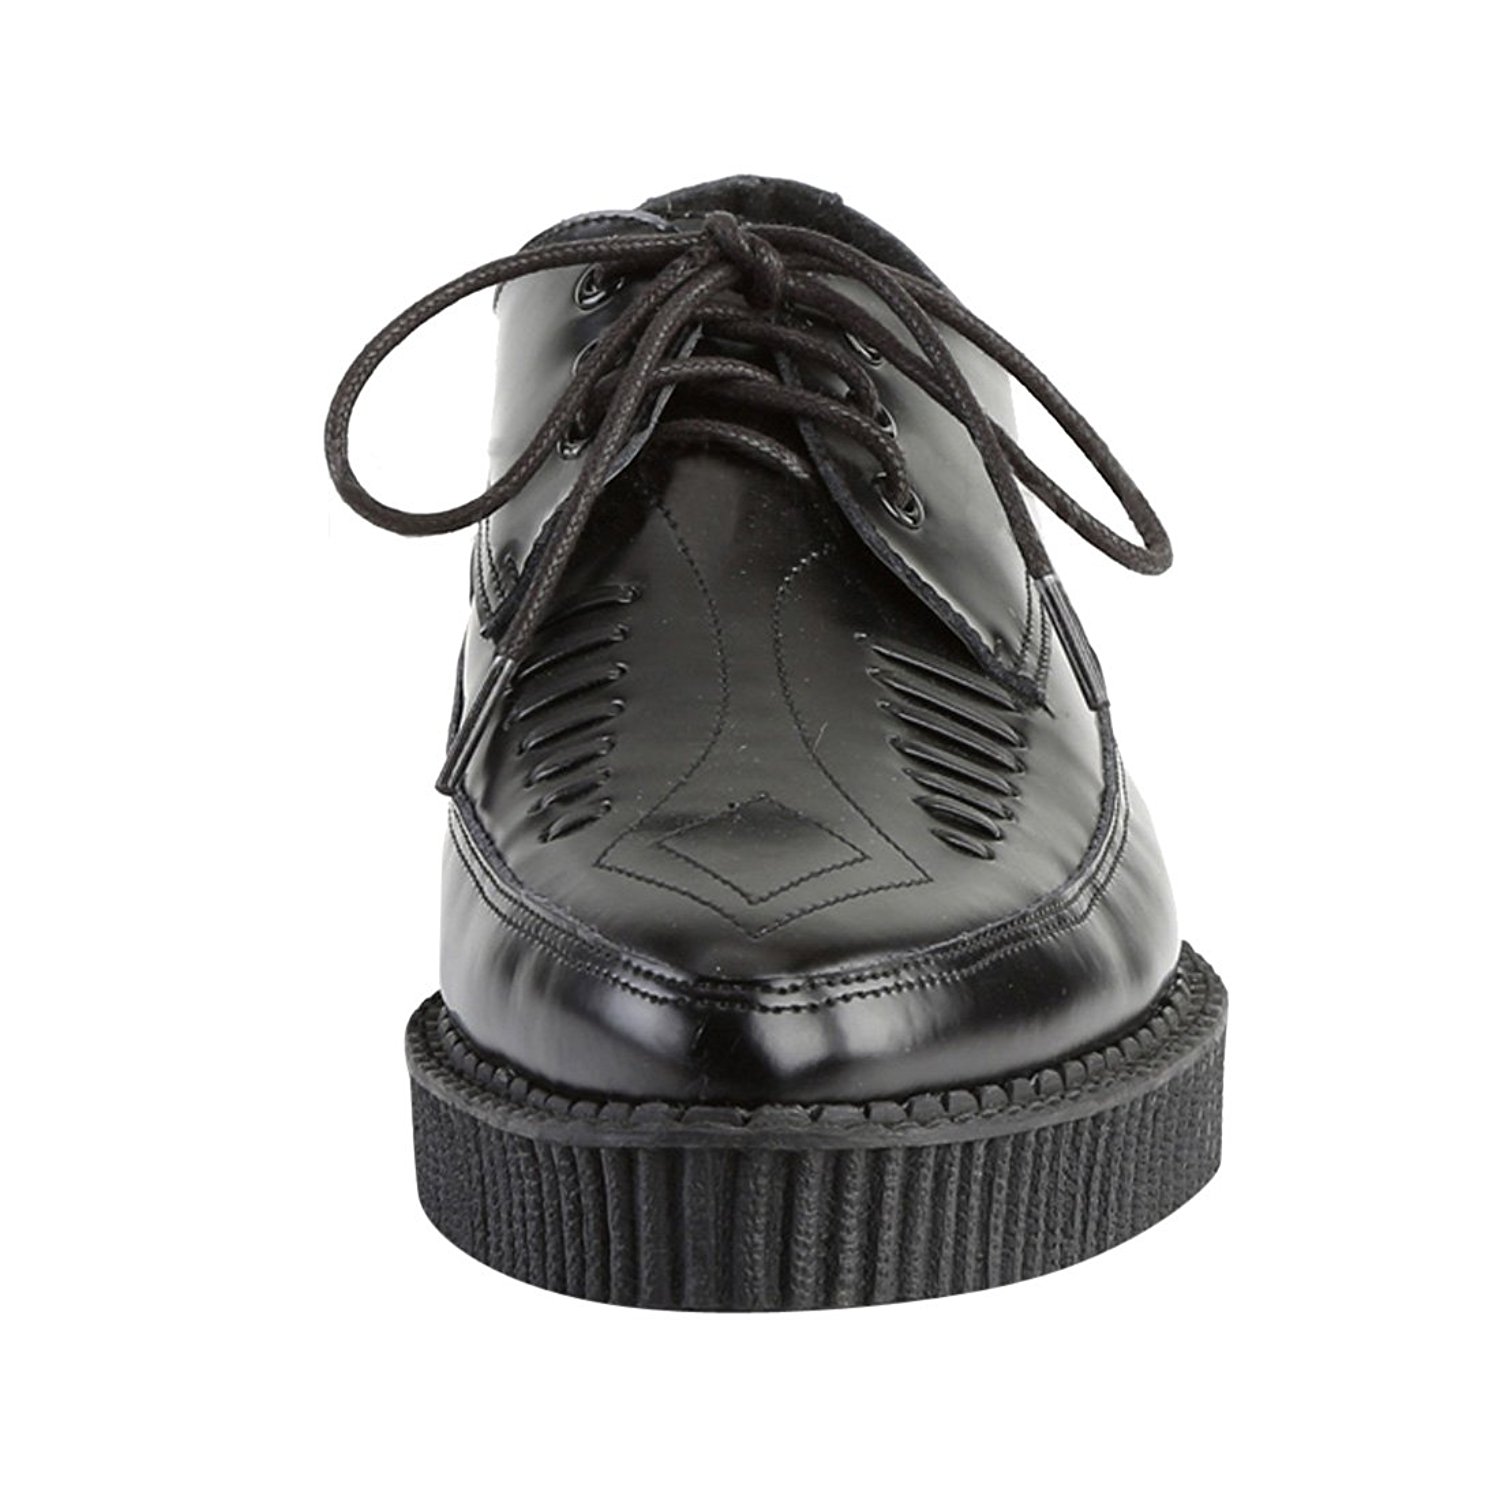 mens leather creepers